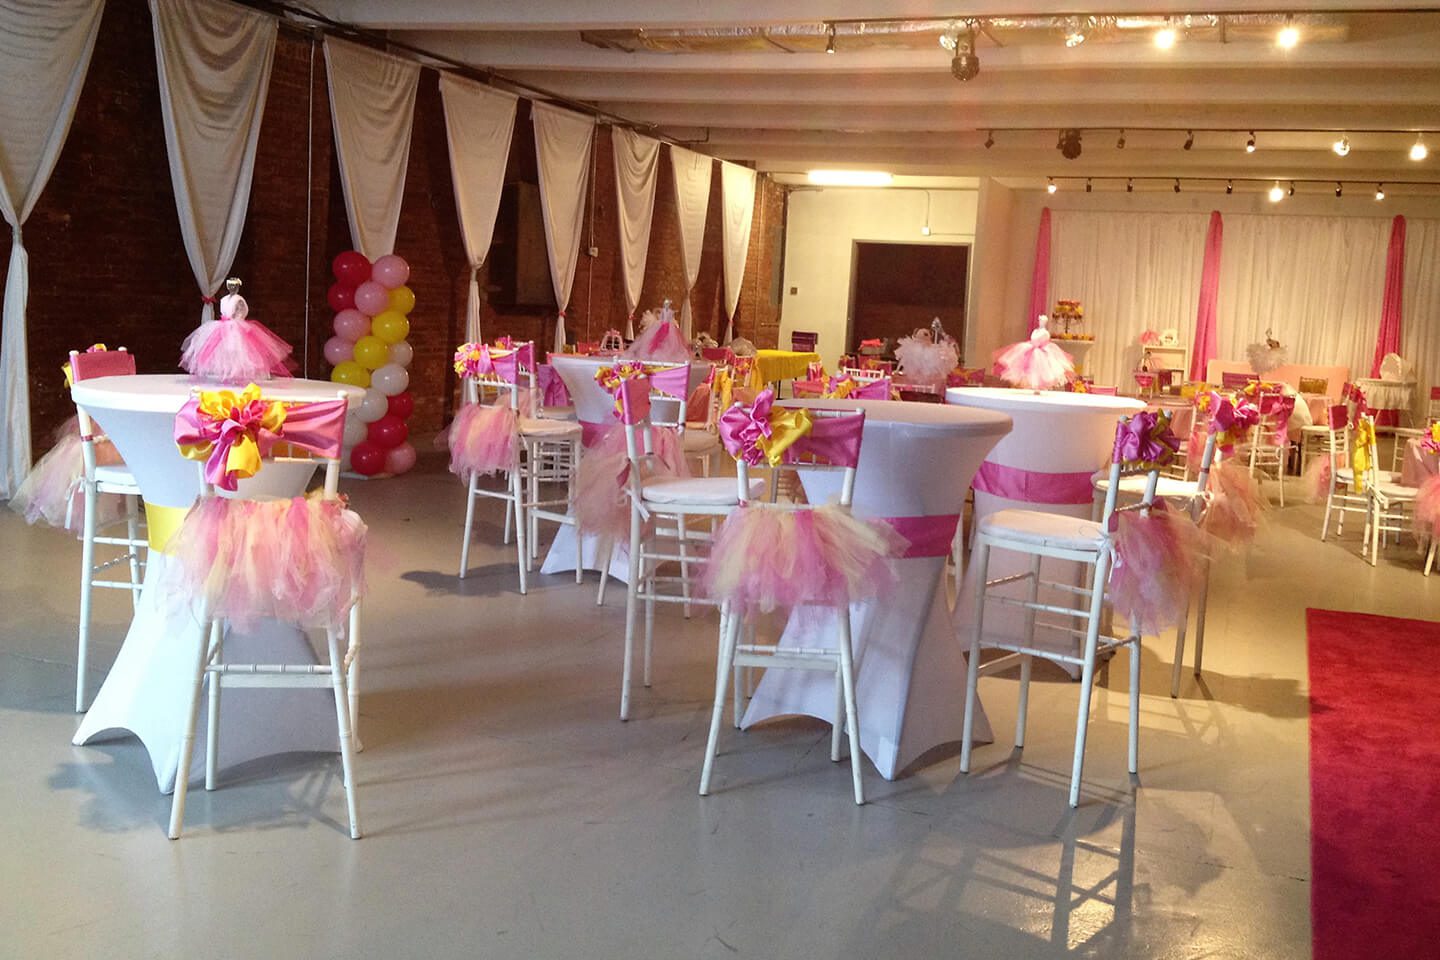 A room with chairs and tables decorated in pink